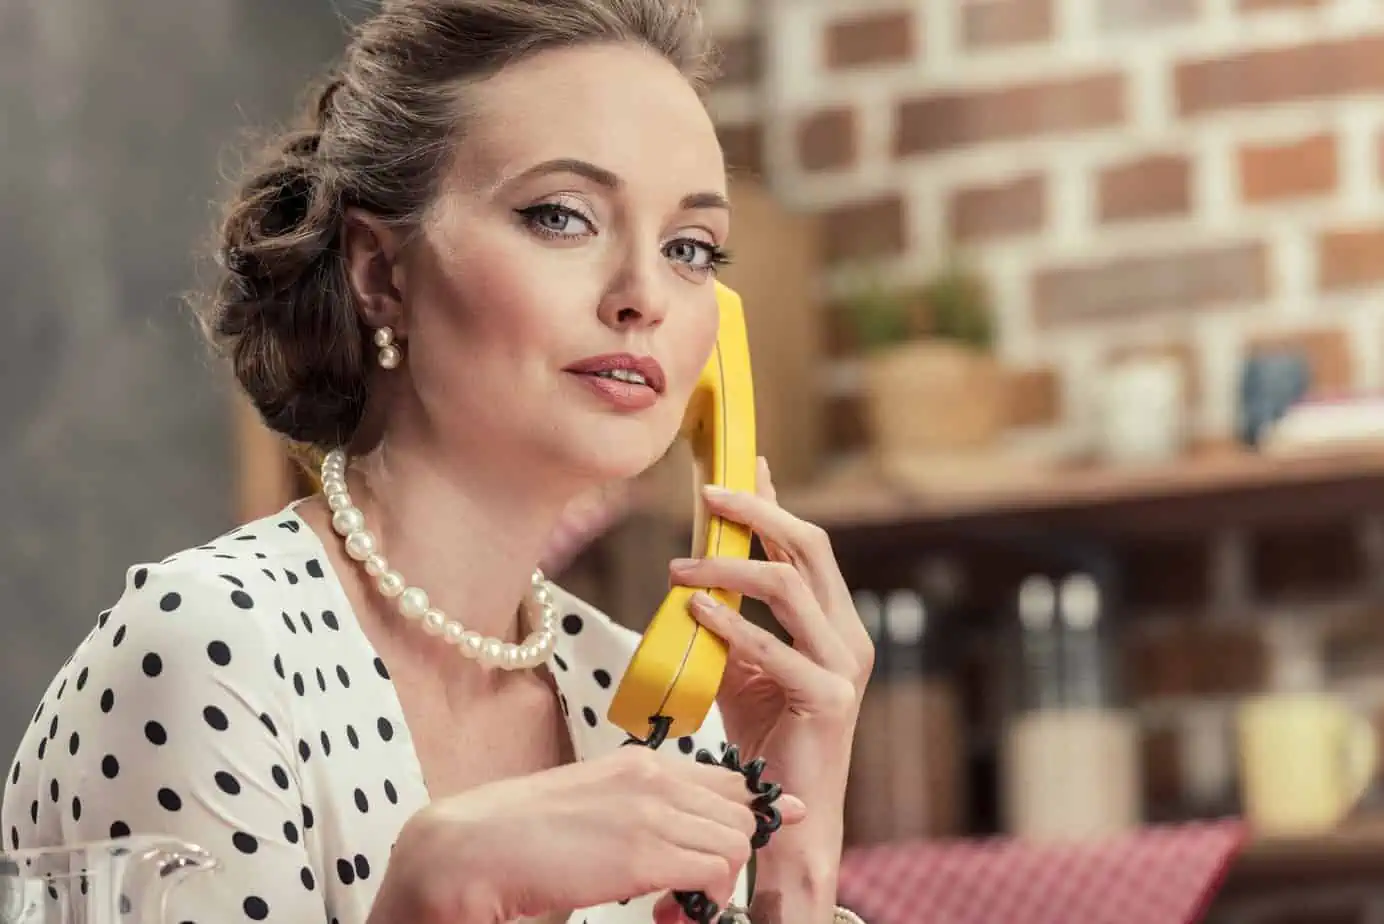 A woman holding a banana up to her face